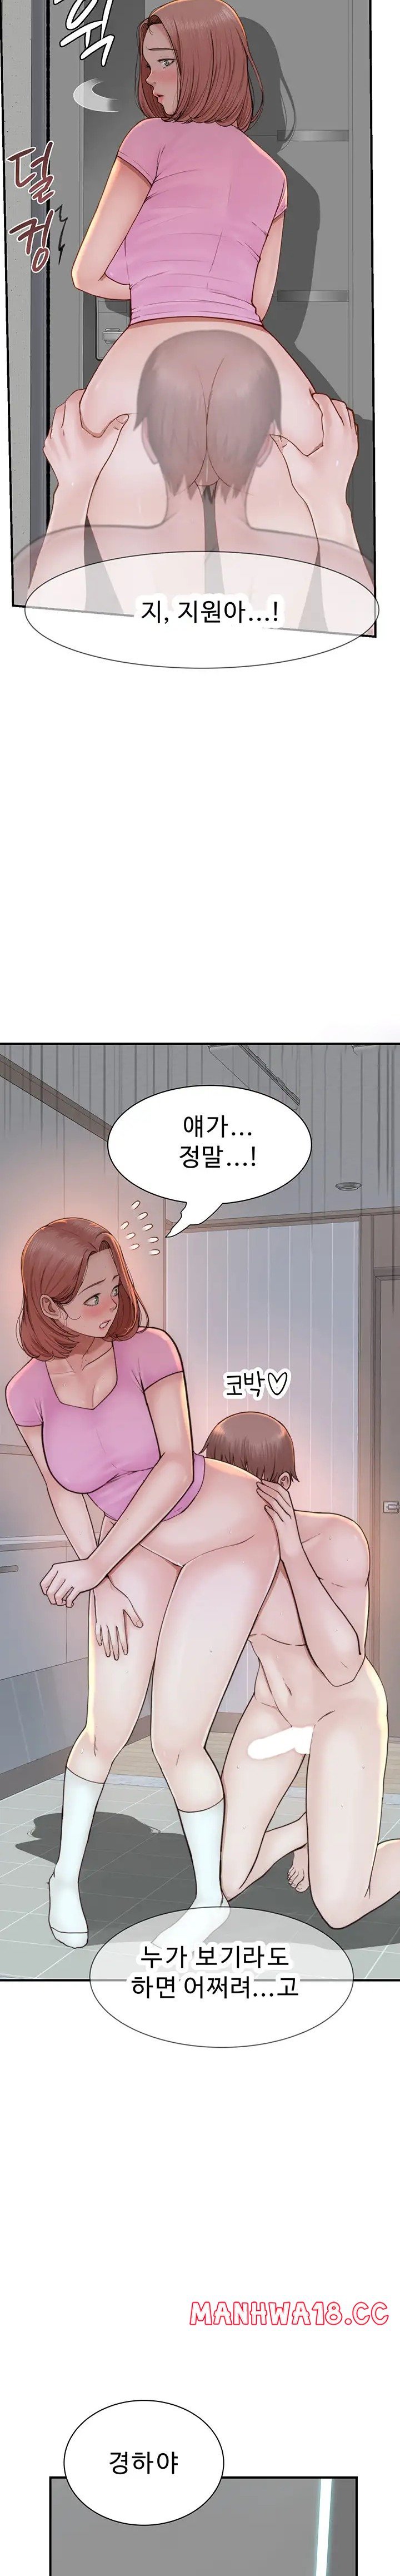 addicted-to-my-mother-raw-chap-17-28